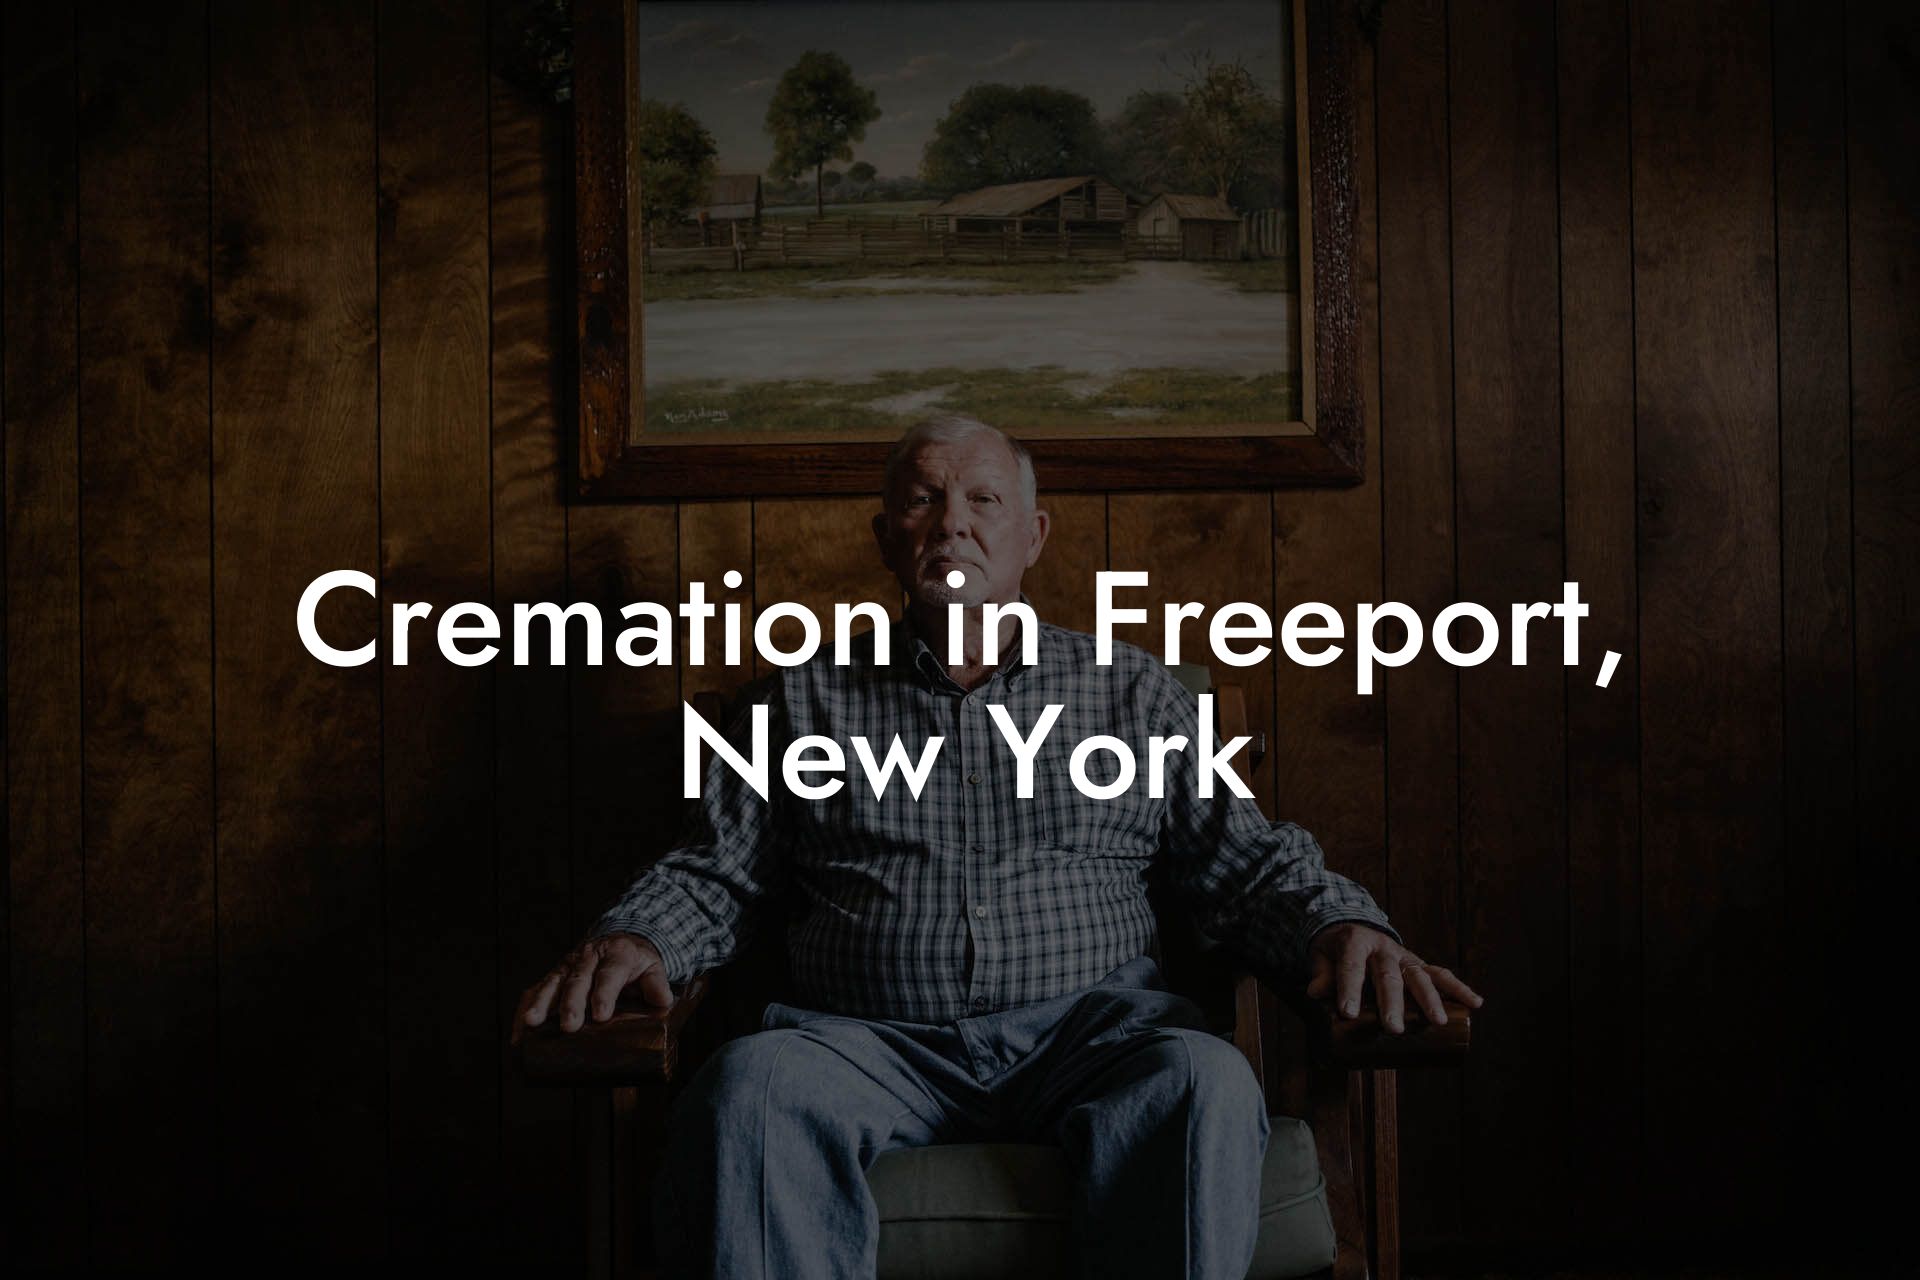 Cremation in Freeport, New York